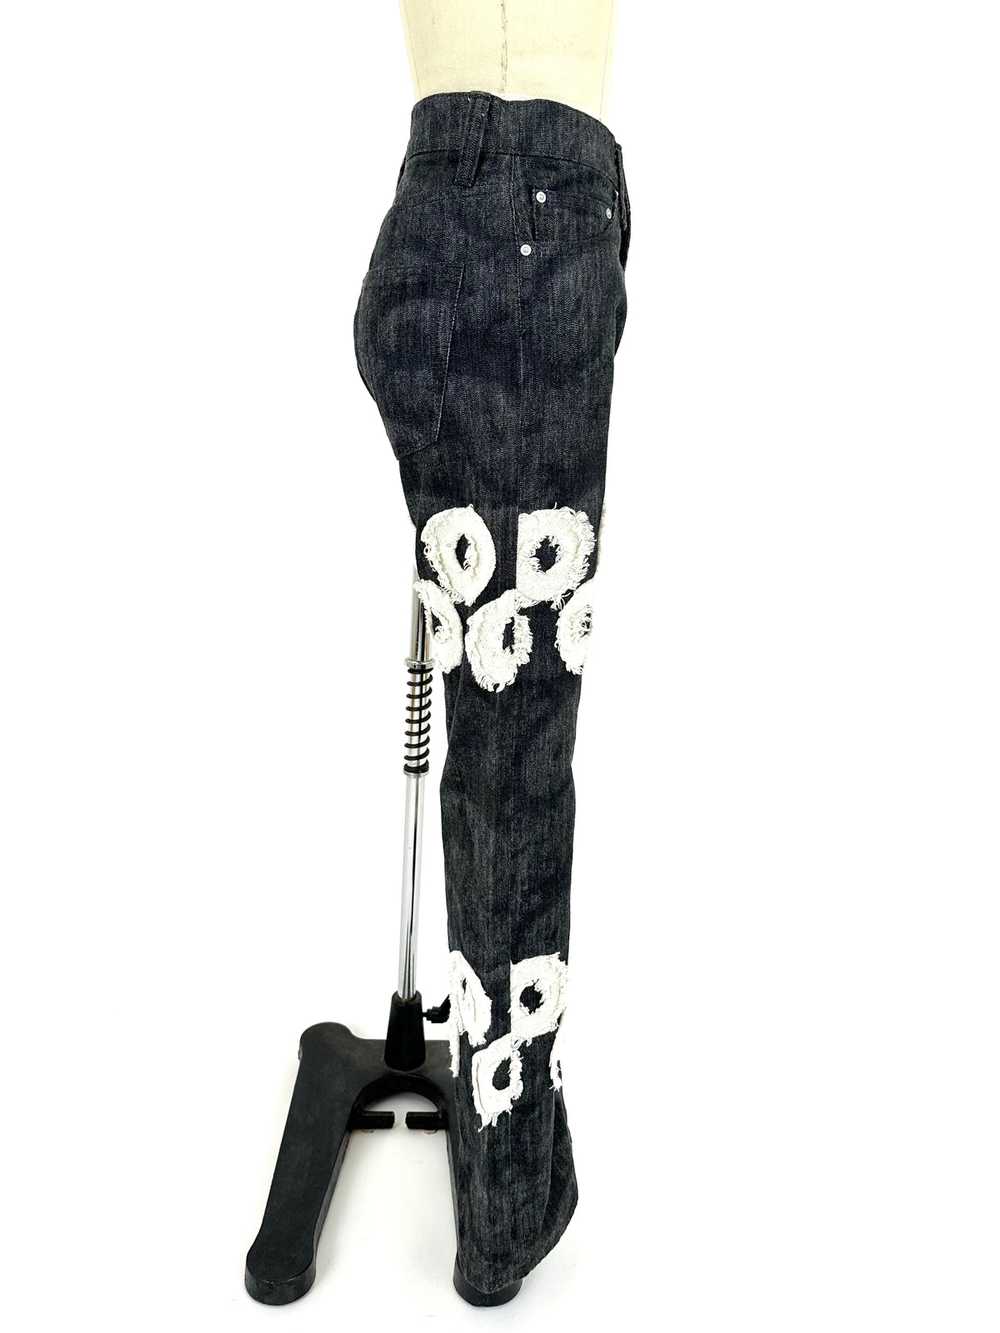 2011 Issey Miyake Archive Embroidered Jeans - image 4